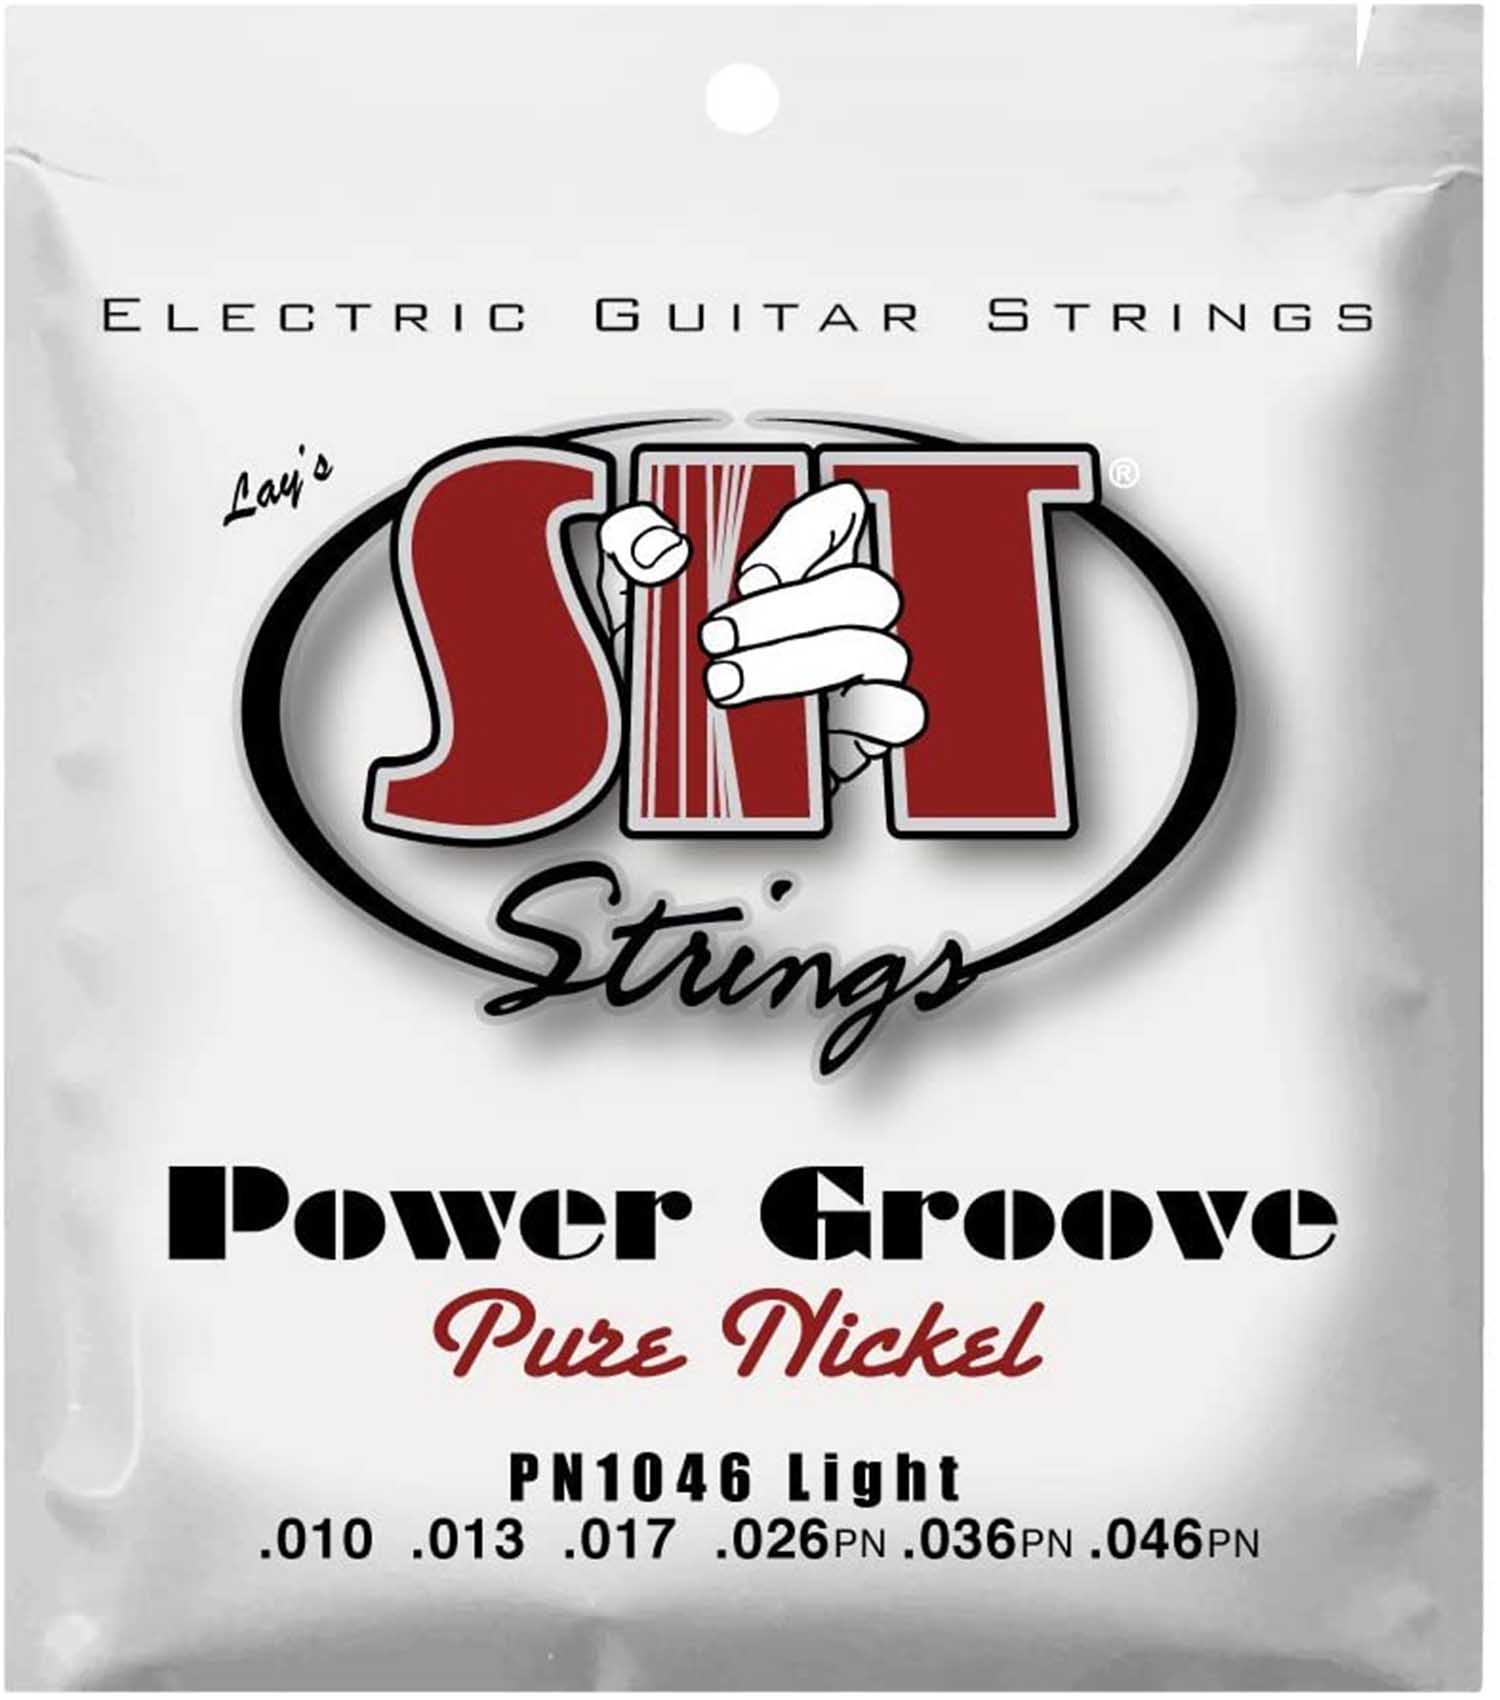 S.I.T. String PN1046, Light Pure Nickel Wound Electric Guitar String by SIT Strings